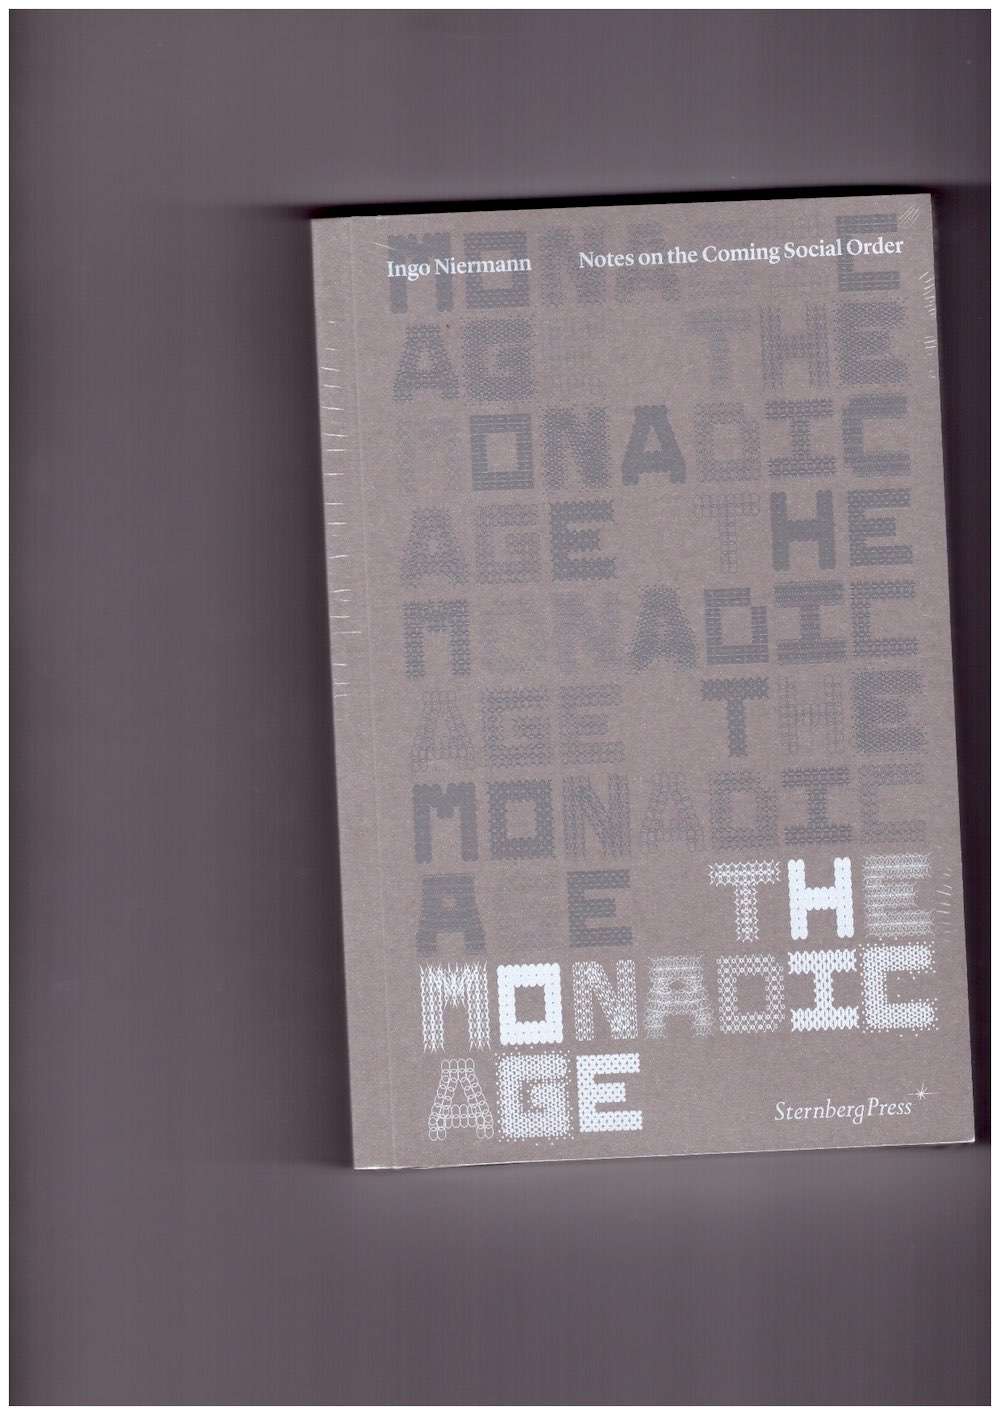 NIERMANN, Ingo - The Monadic Age – Notes on the Coming Social Order